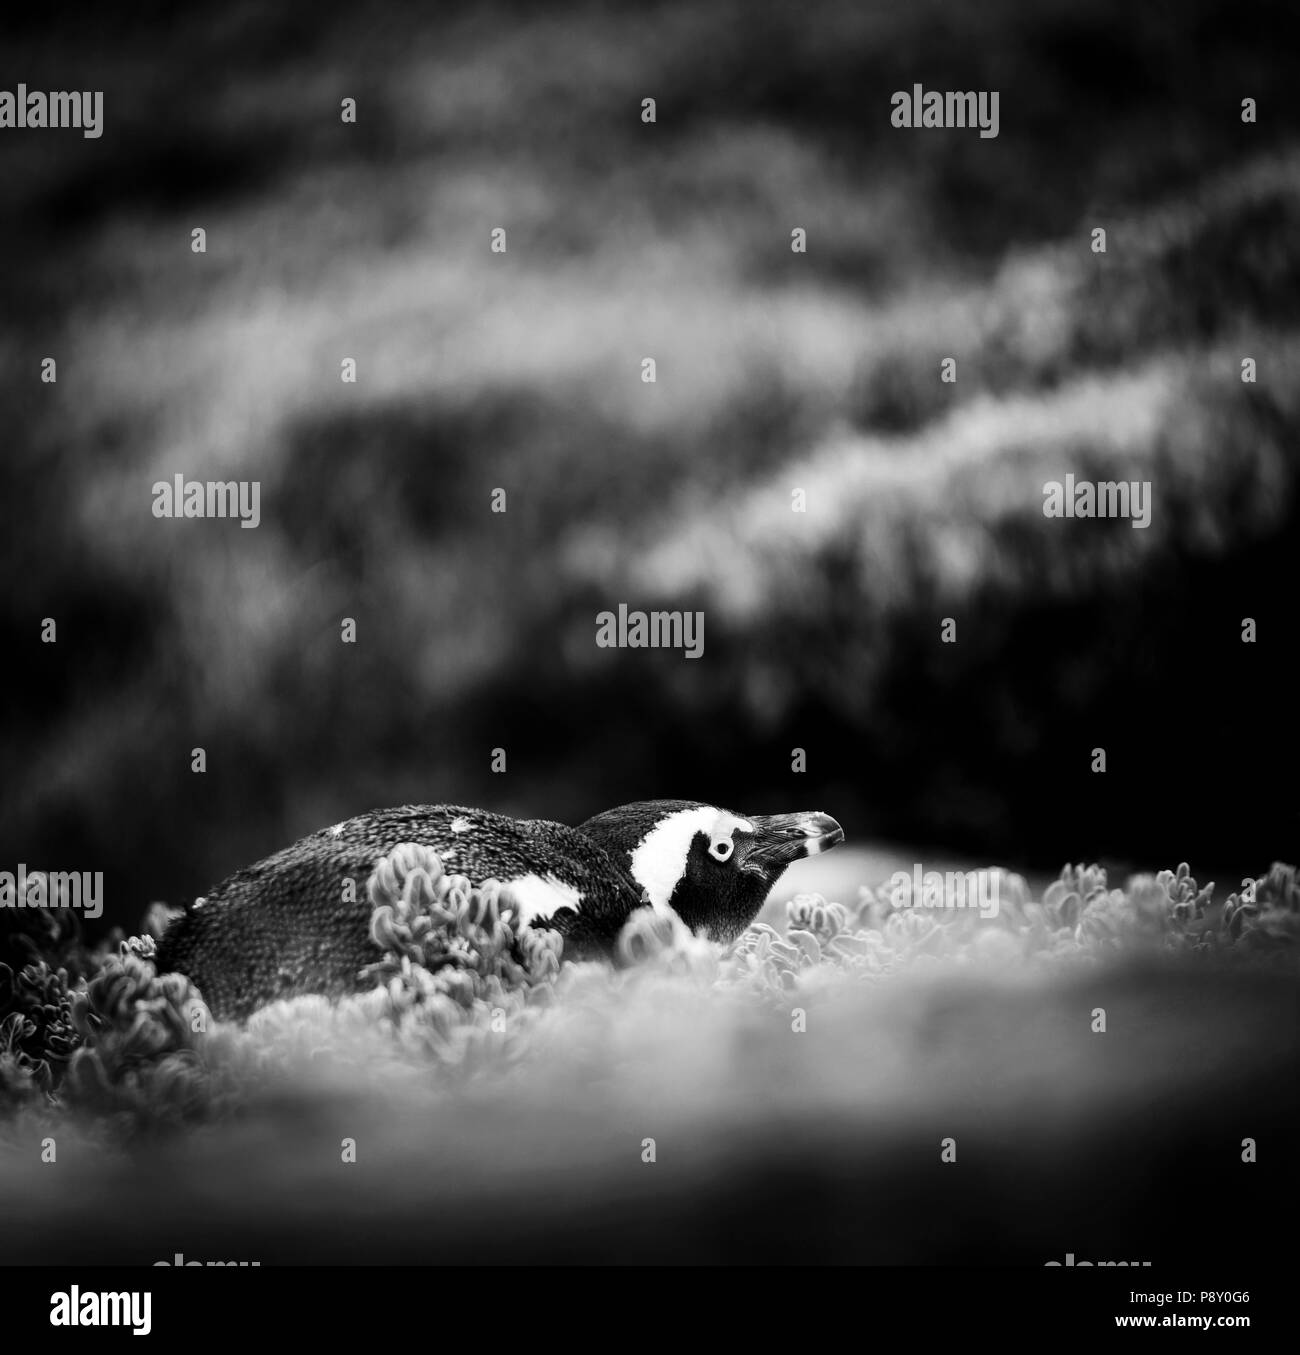 Shy African Penguin hiding amongst vegetation in Cape Peninsula, South Africa in black and white Stock Photo